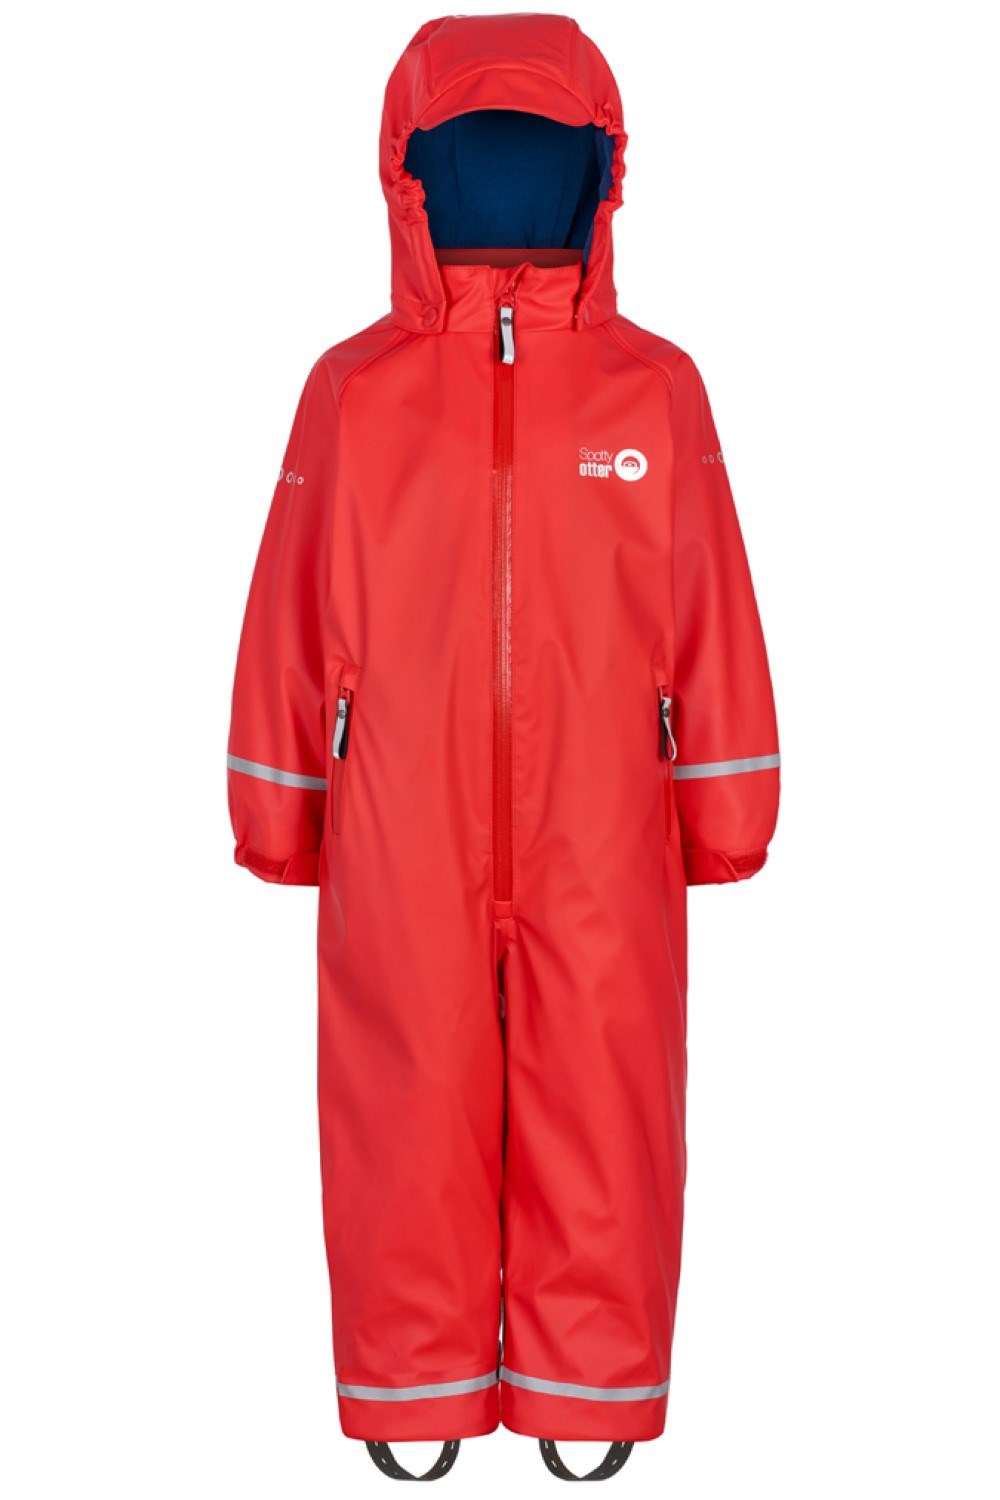 Forest Leader Kids Insulated PU Suit -